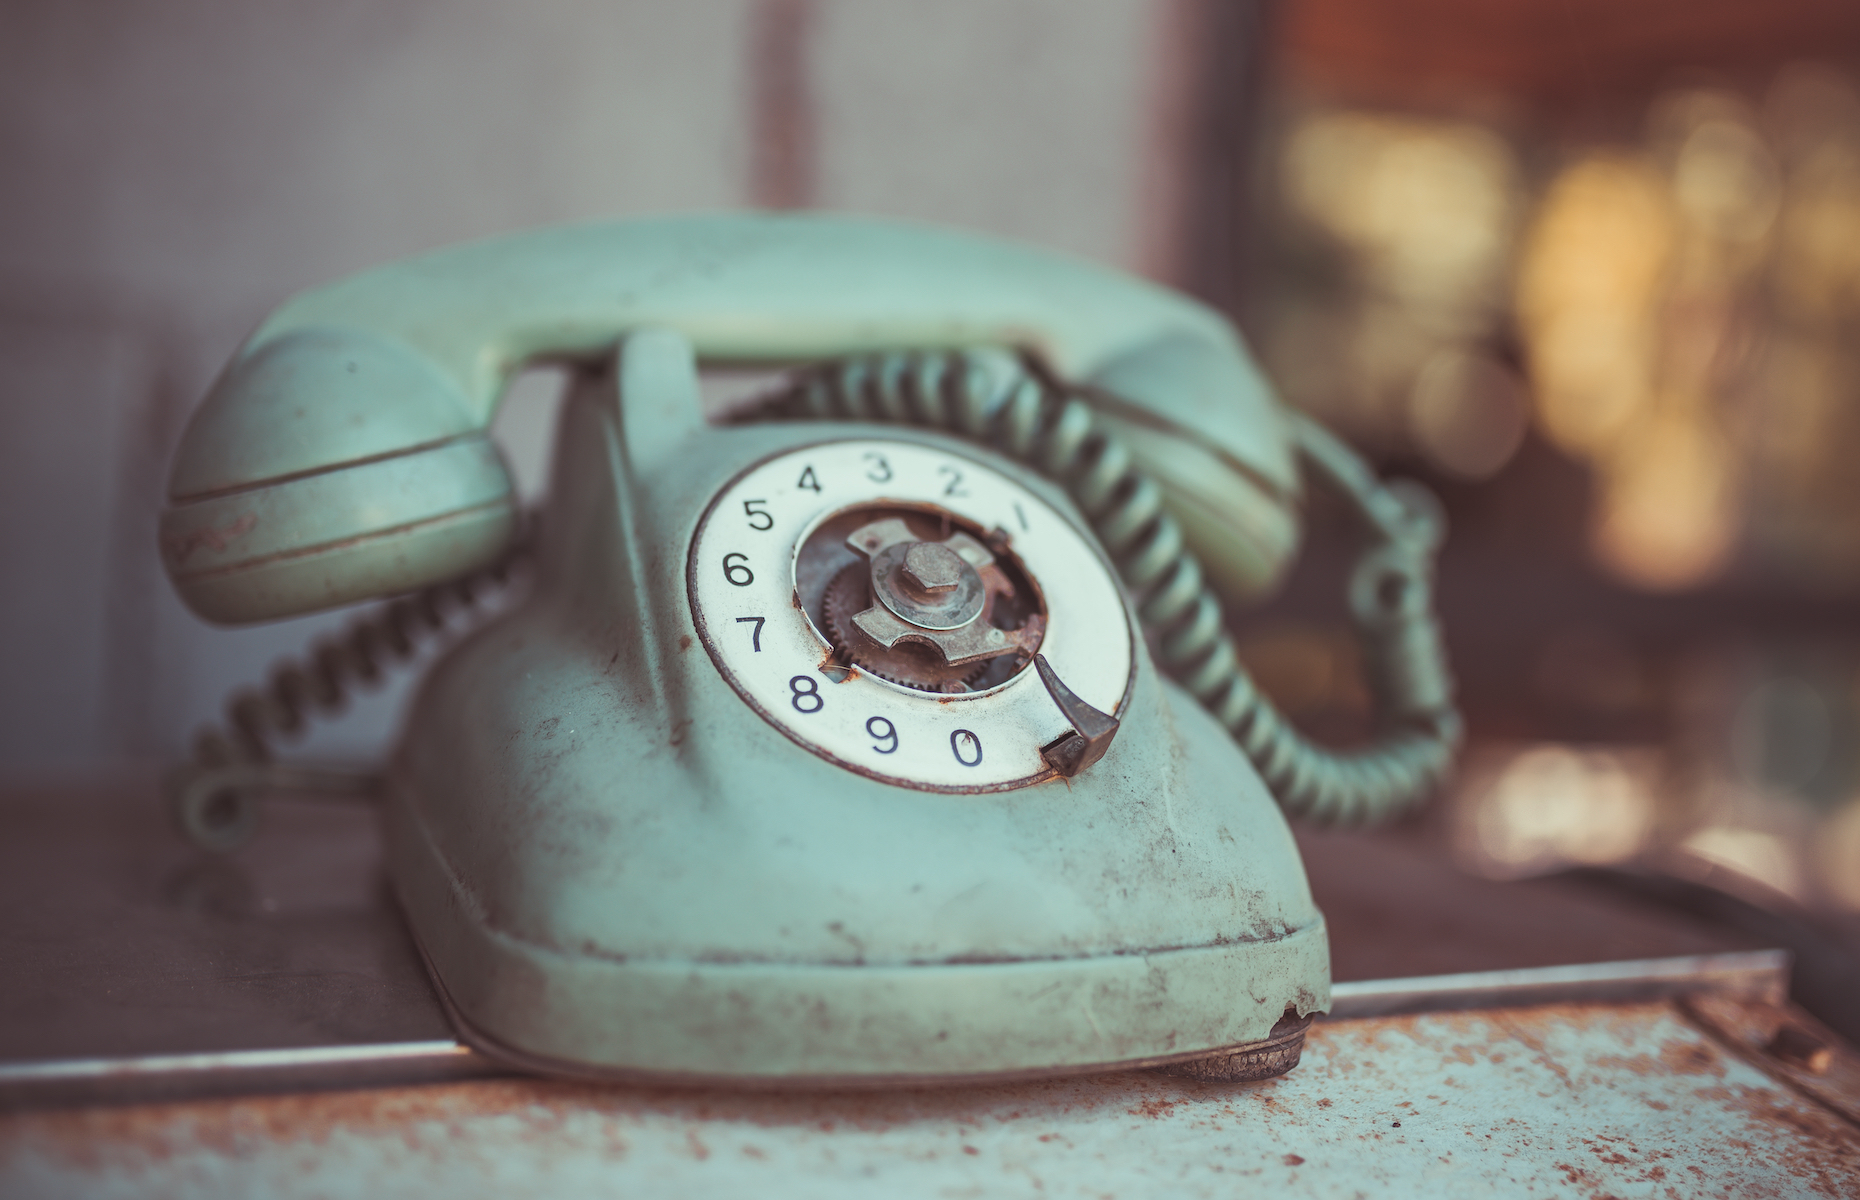 <p>The first telephone you had was bulky, hanging on the wall, or sitting on a coffee table. It might have buttons to push to make a call, or, if you are really old, you had a <a href="https://interestingengineering.com/what-are-rotary-dial-phones-and-how-do-they-work">rotary phone</a> with a plastic wheel you dialed with a finger. (You dreaded phone numbers with a lot of zeros.) There was no caller ID or voicemail, and if you wanted the phone to become a mobile device, you had to have a really, really long cord.</p>